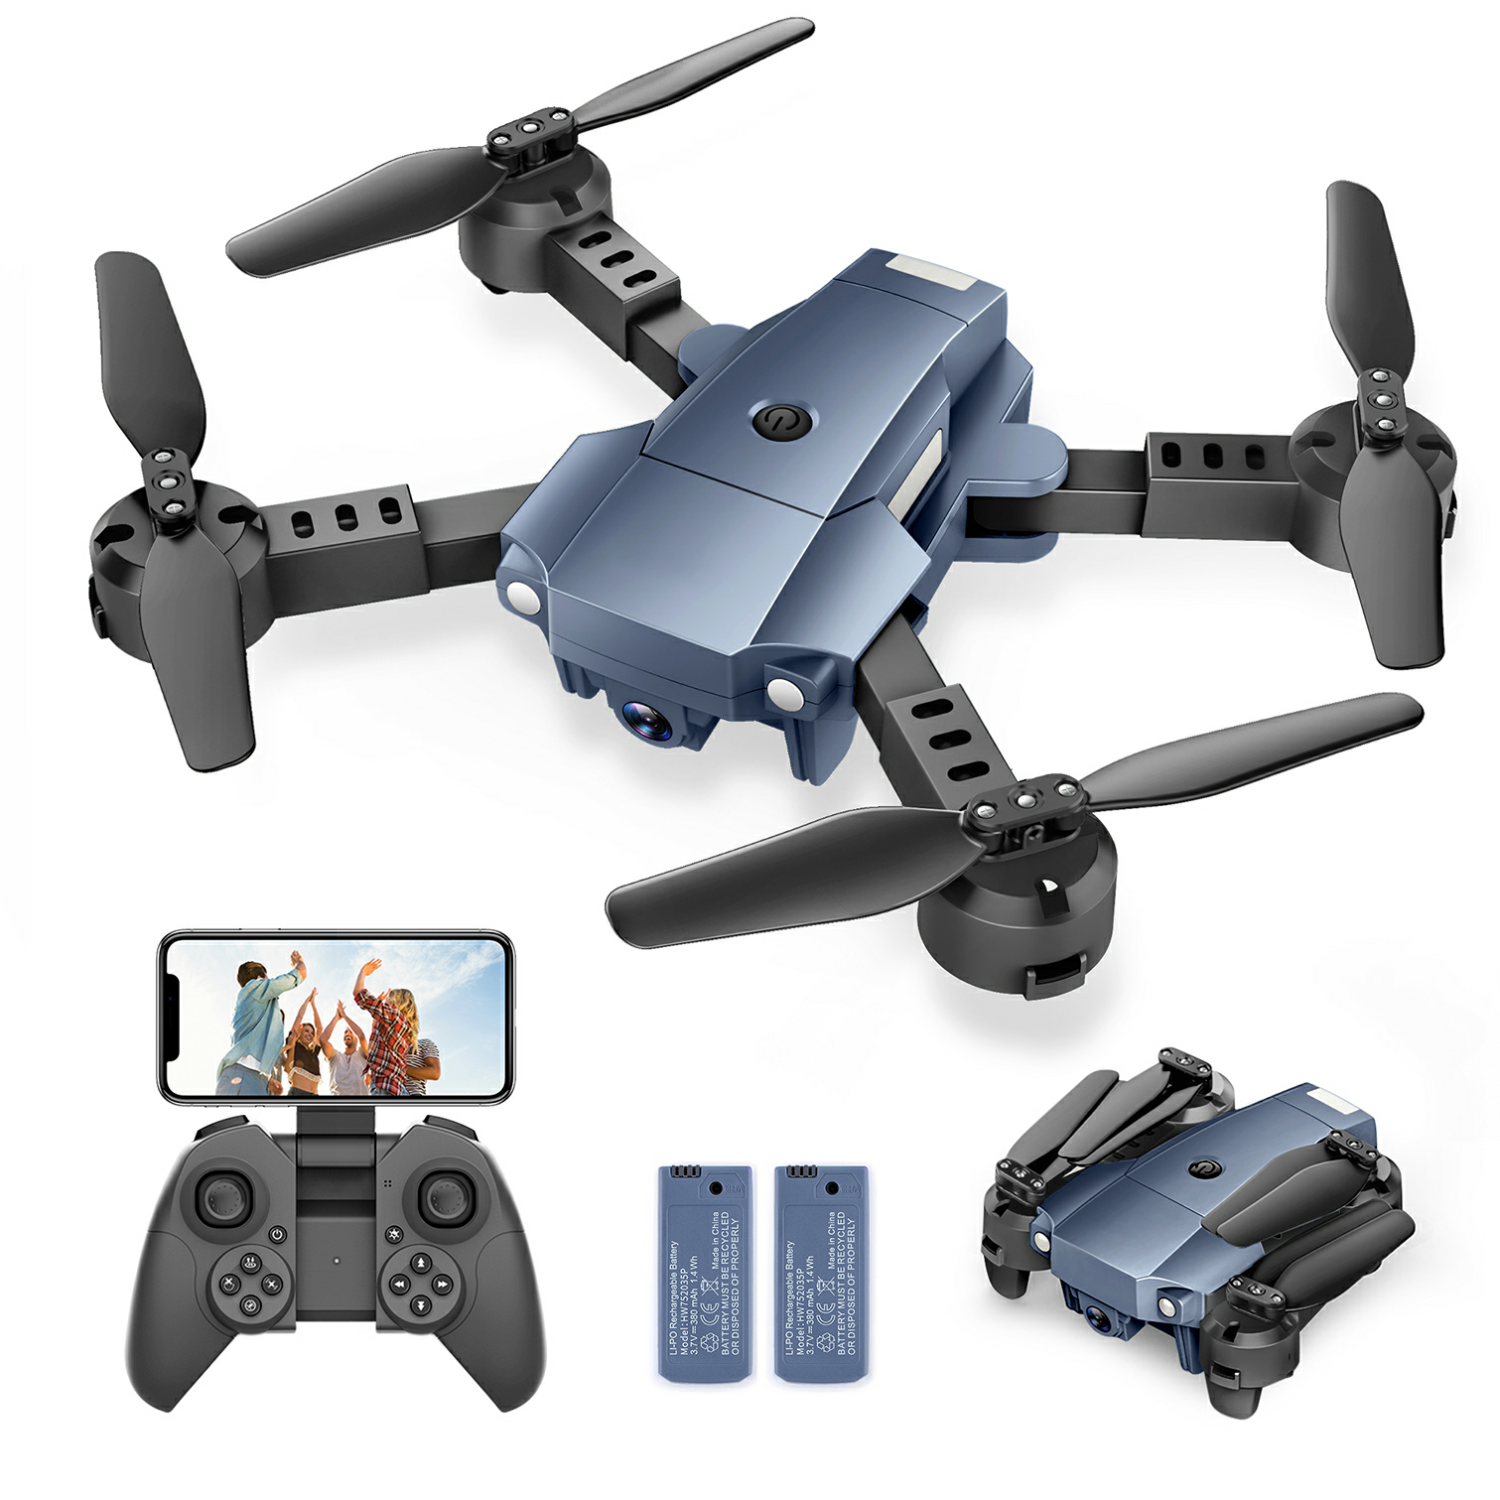 Vantop - Snaptain A10 Mini Foldable Drone with 1080P HD Camera FPV Wi-Fi RC Quadcopter, Voice Control, Gesture Control, High-Speed Rotation, 3D Flips